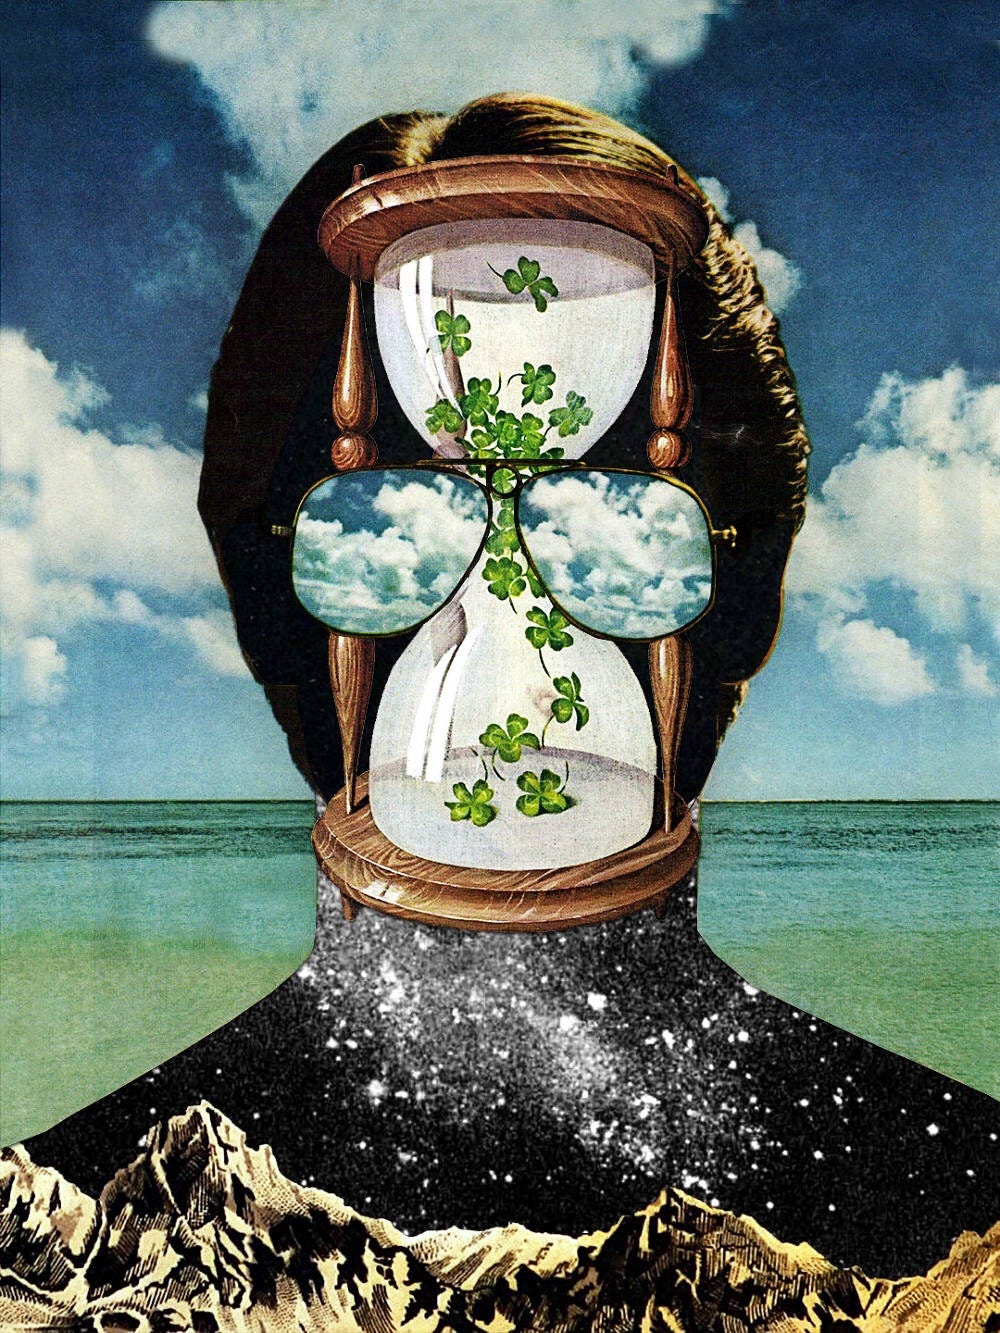 Eugenia Loli Surrealist Vintage Collages | by Jay Gidwitz | Surrealism